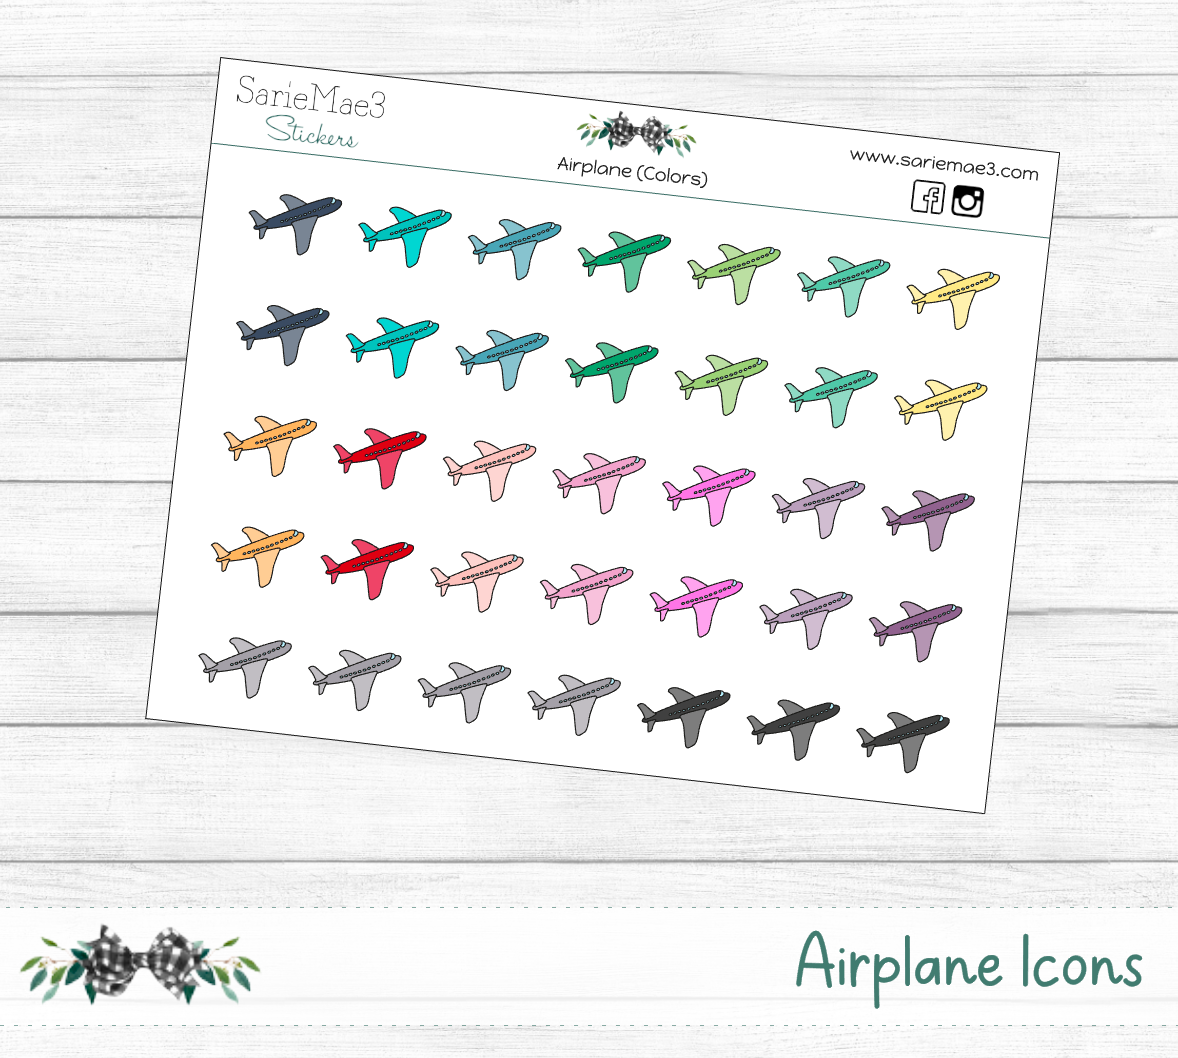 Airplane (Colors) Icons